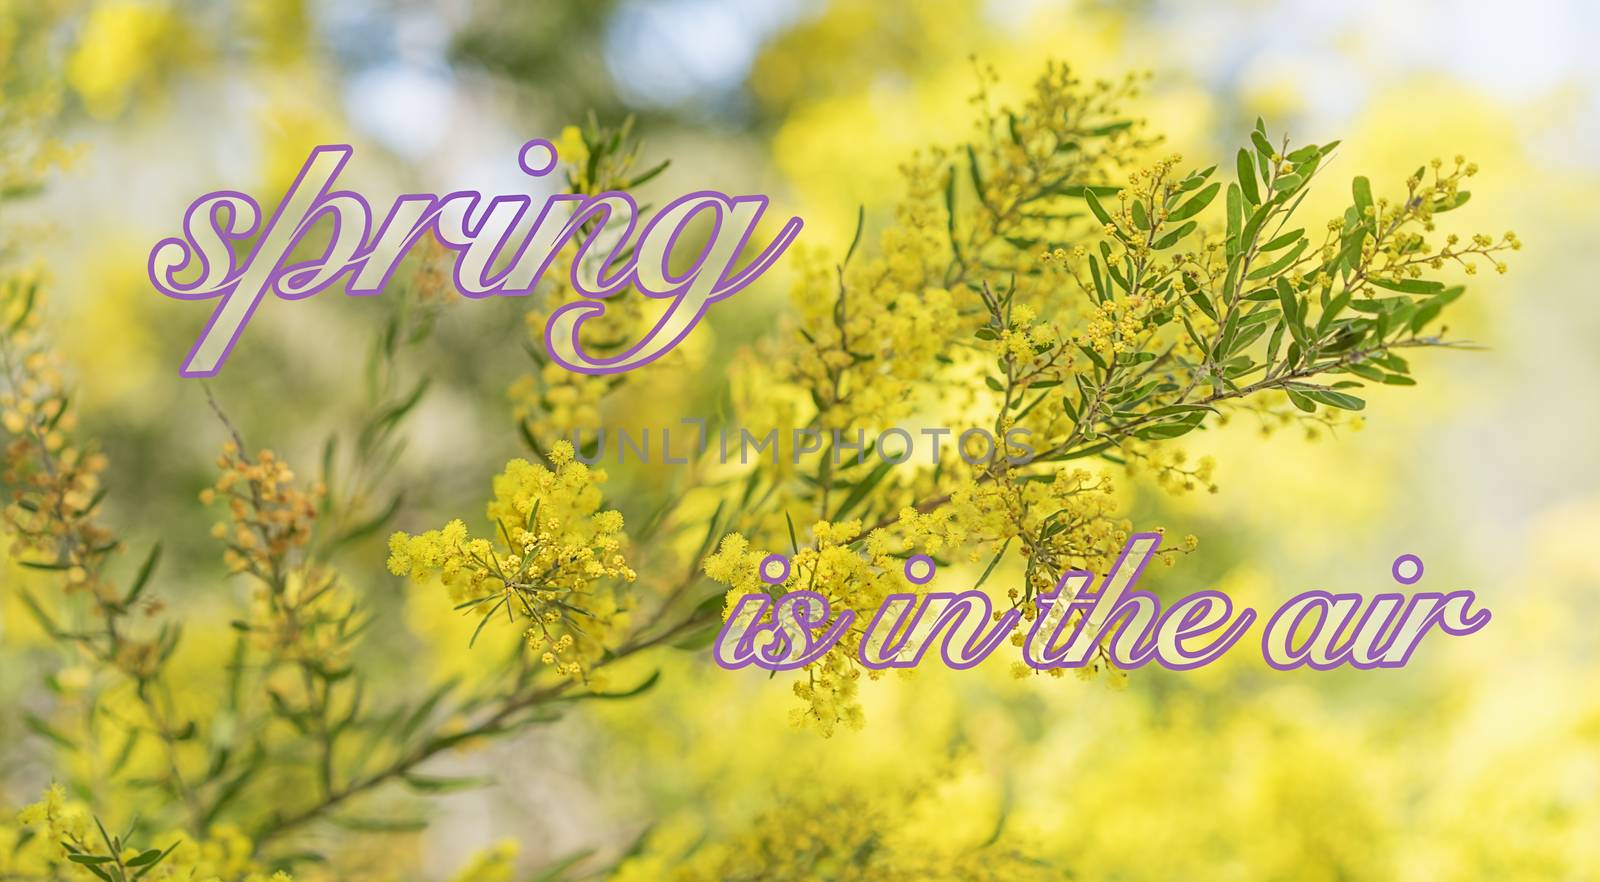 Sring in Australia with wattle and text by sherj